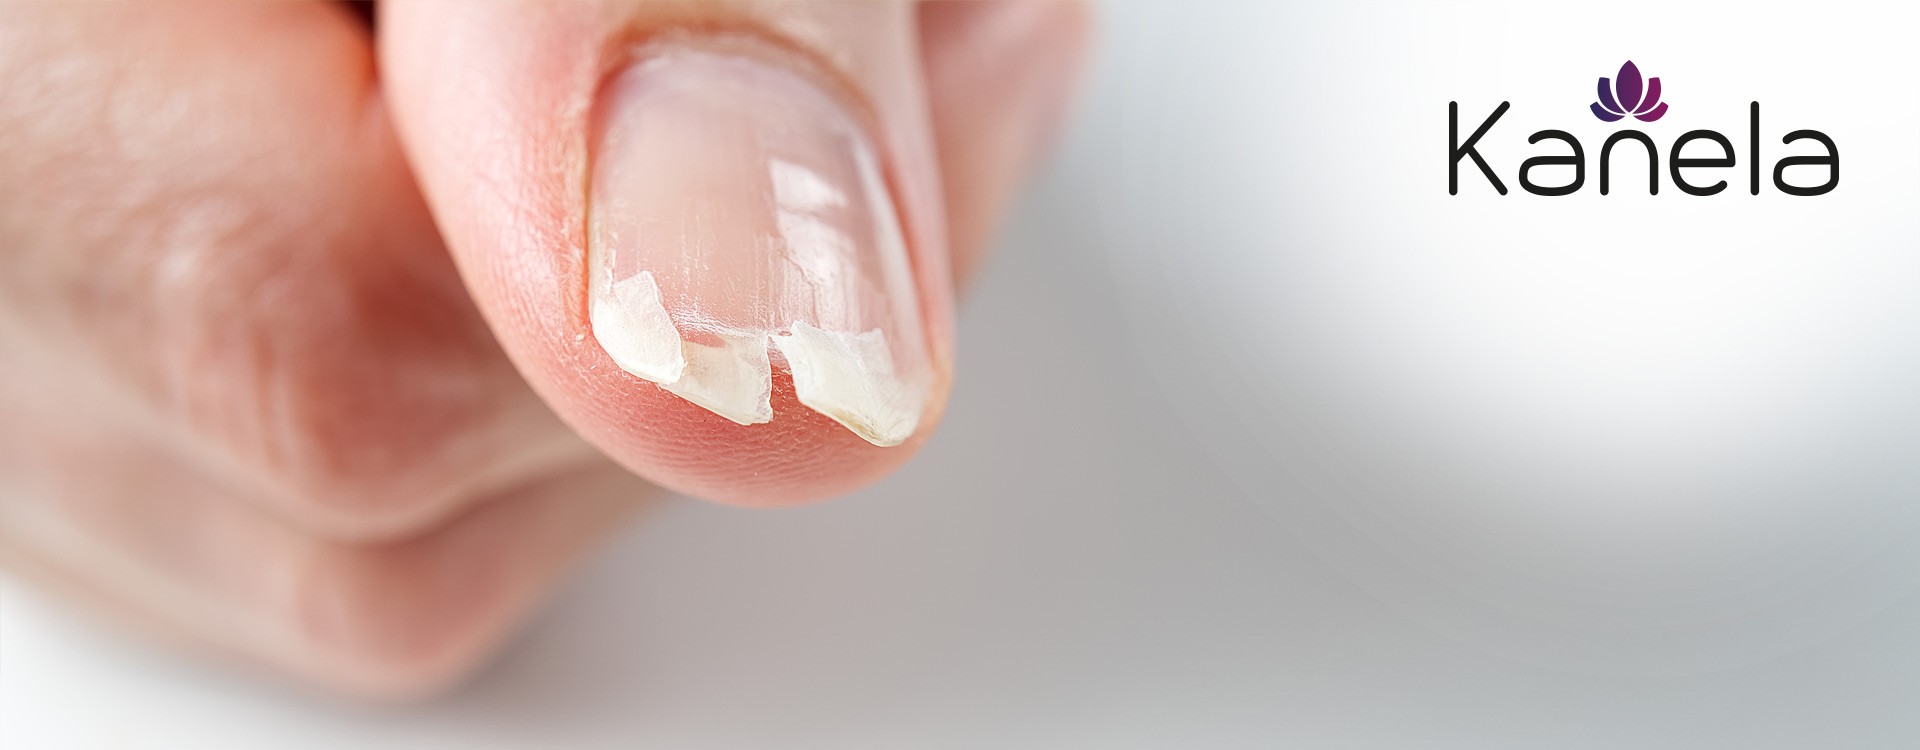 What can be done against brittle nails?